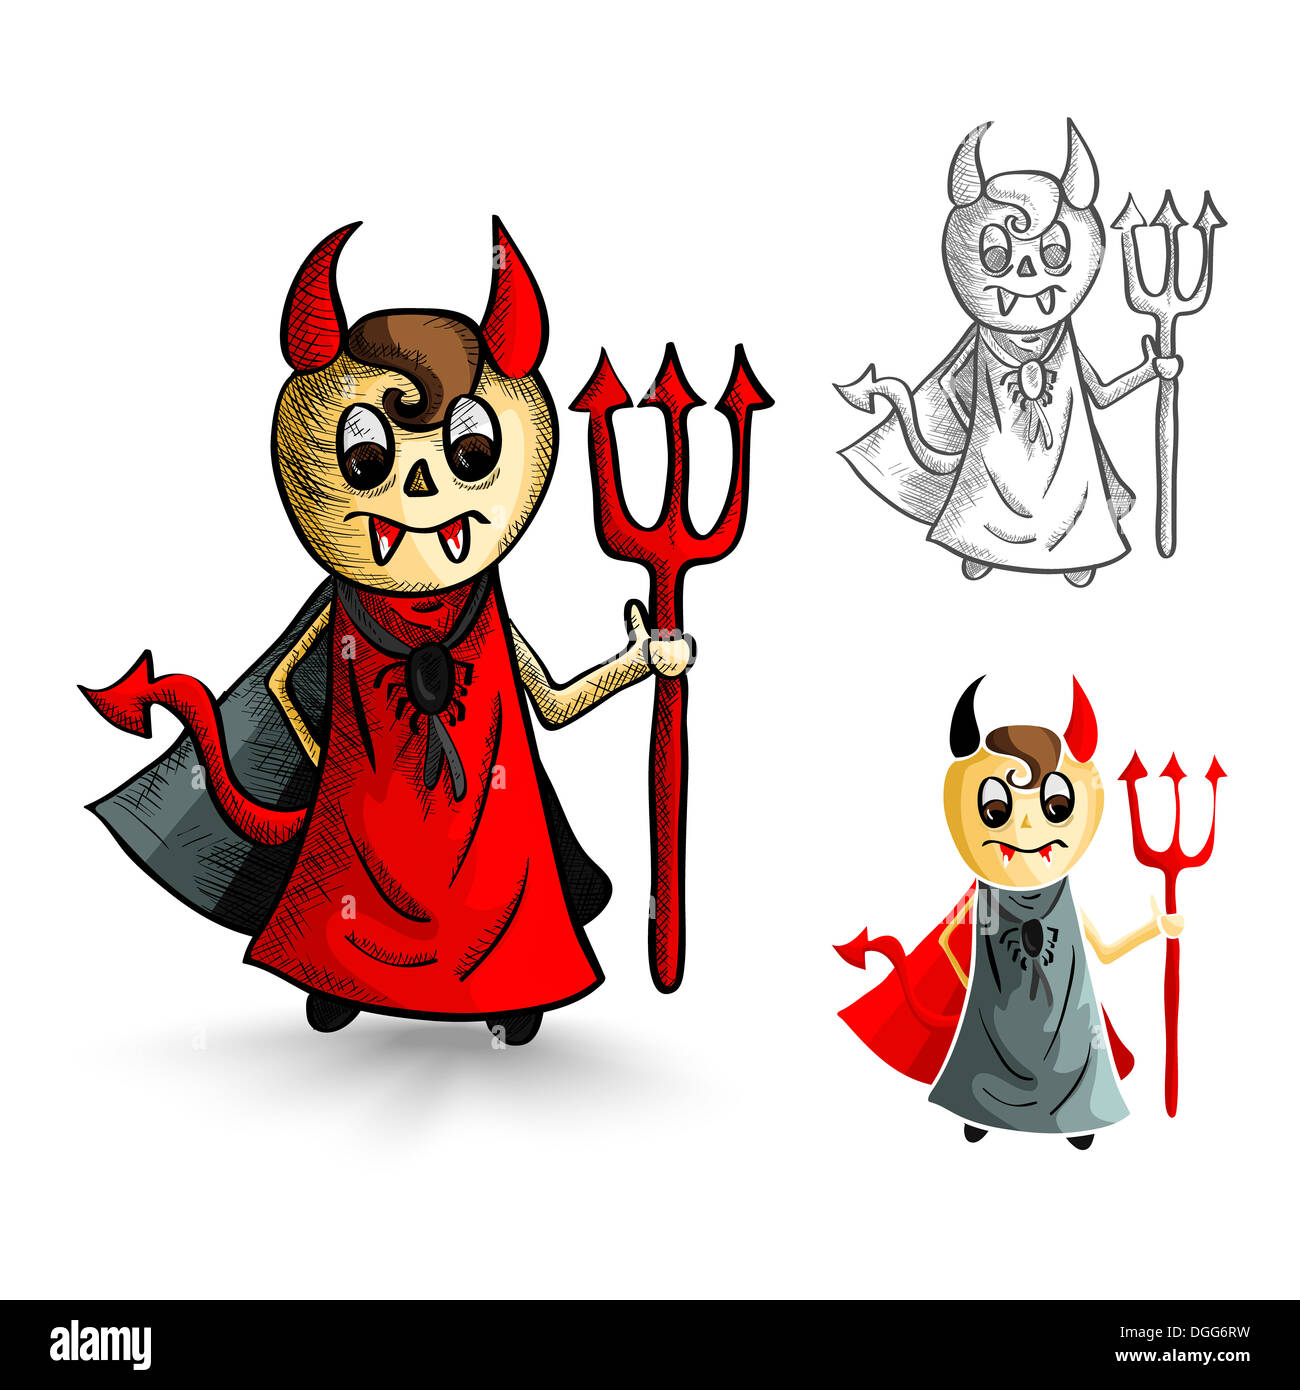 Halloween Monsters isolated spooky hand drawn devil men set. EPS10 vector file organized in layers for easy editing.  Stock Photo